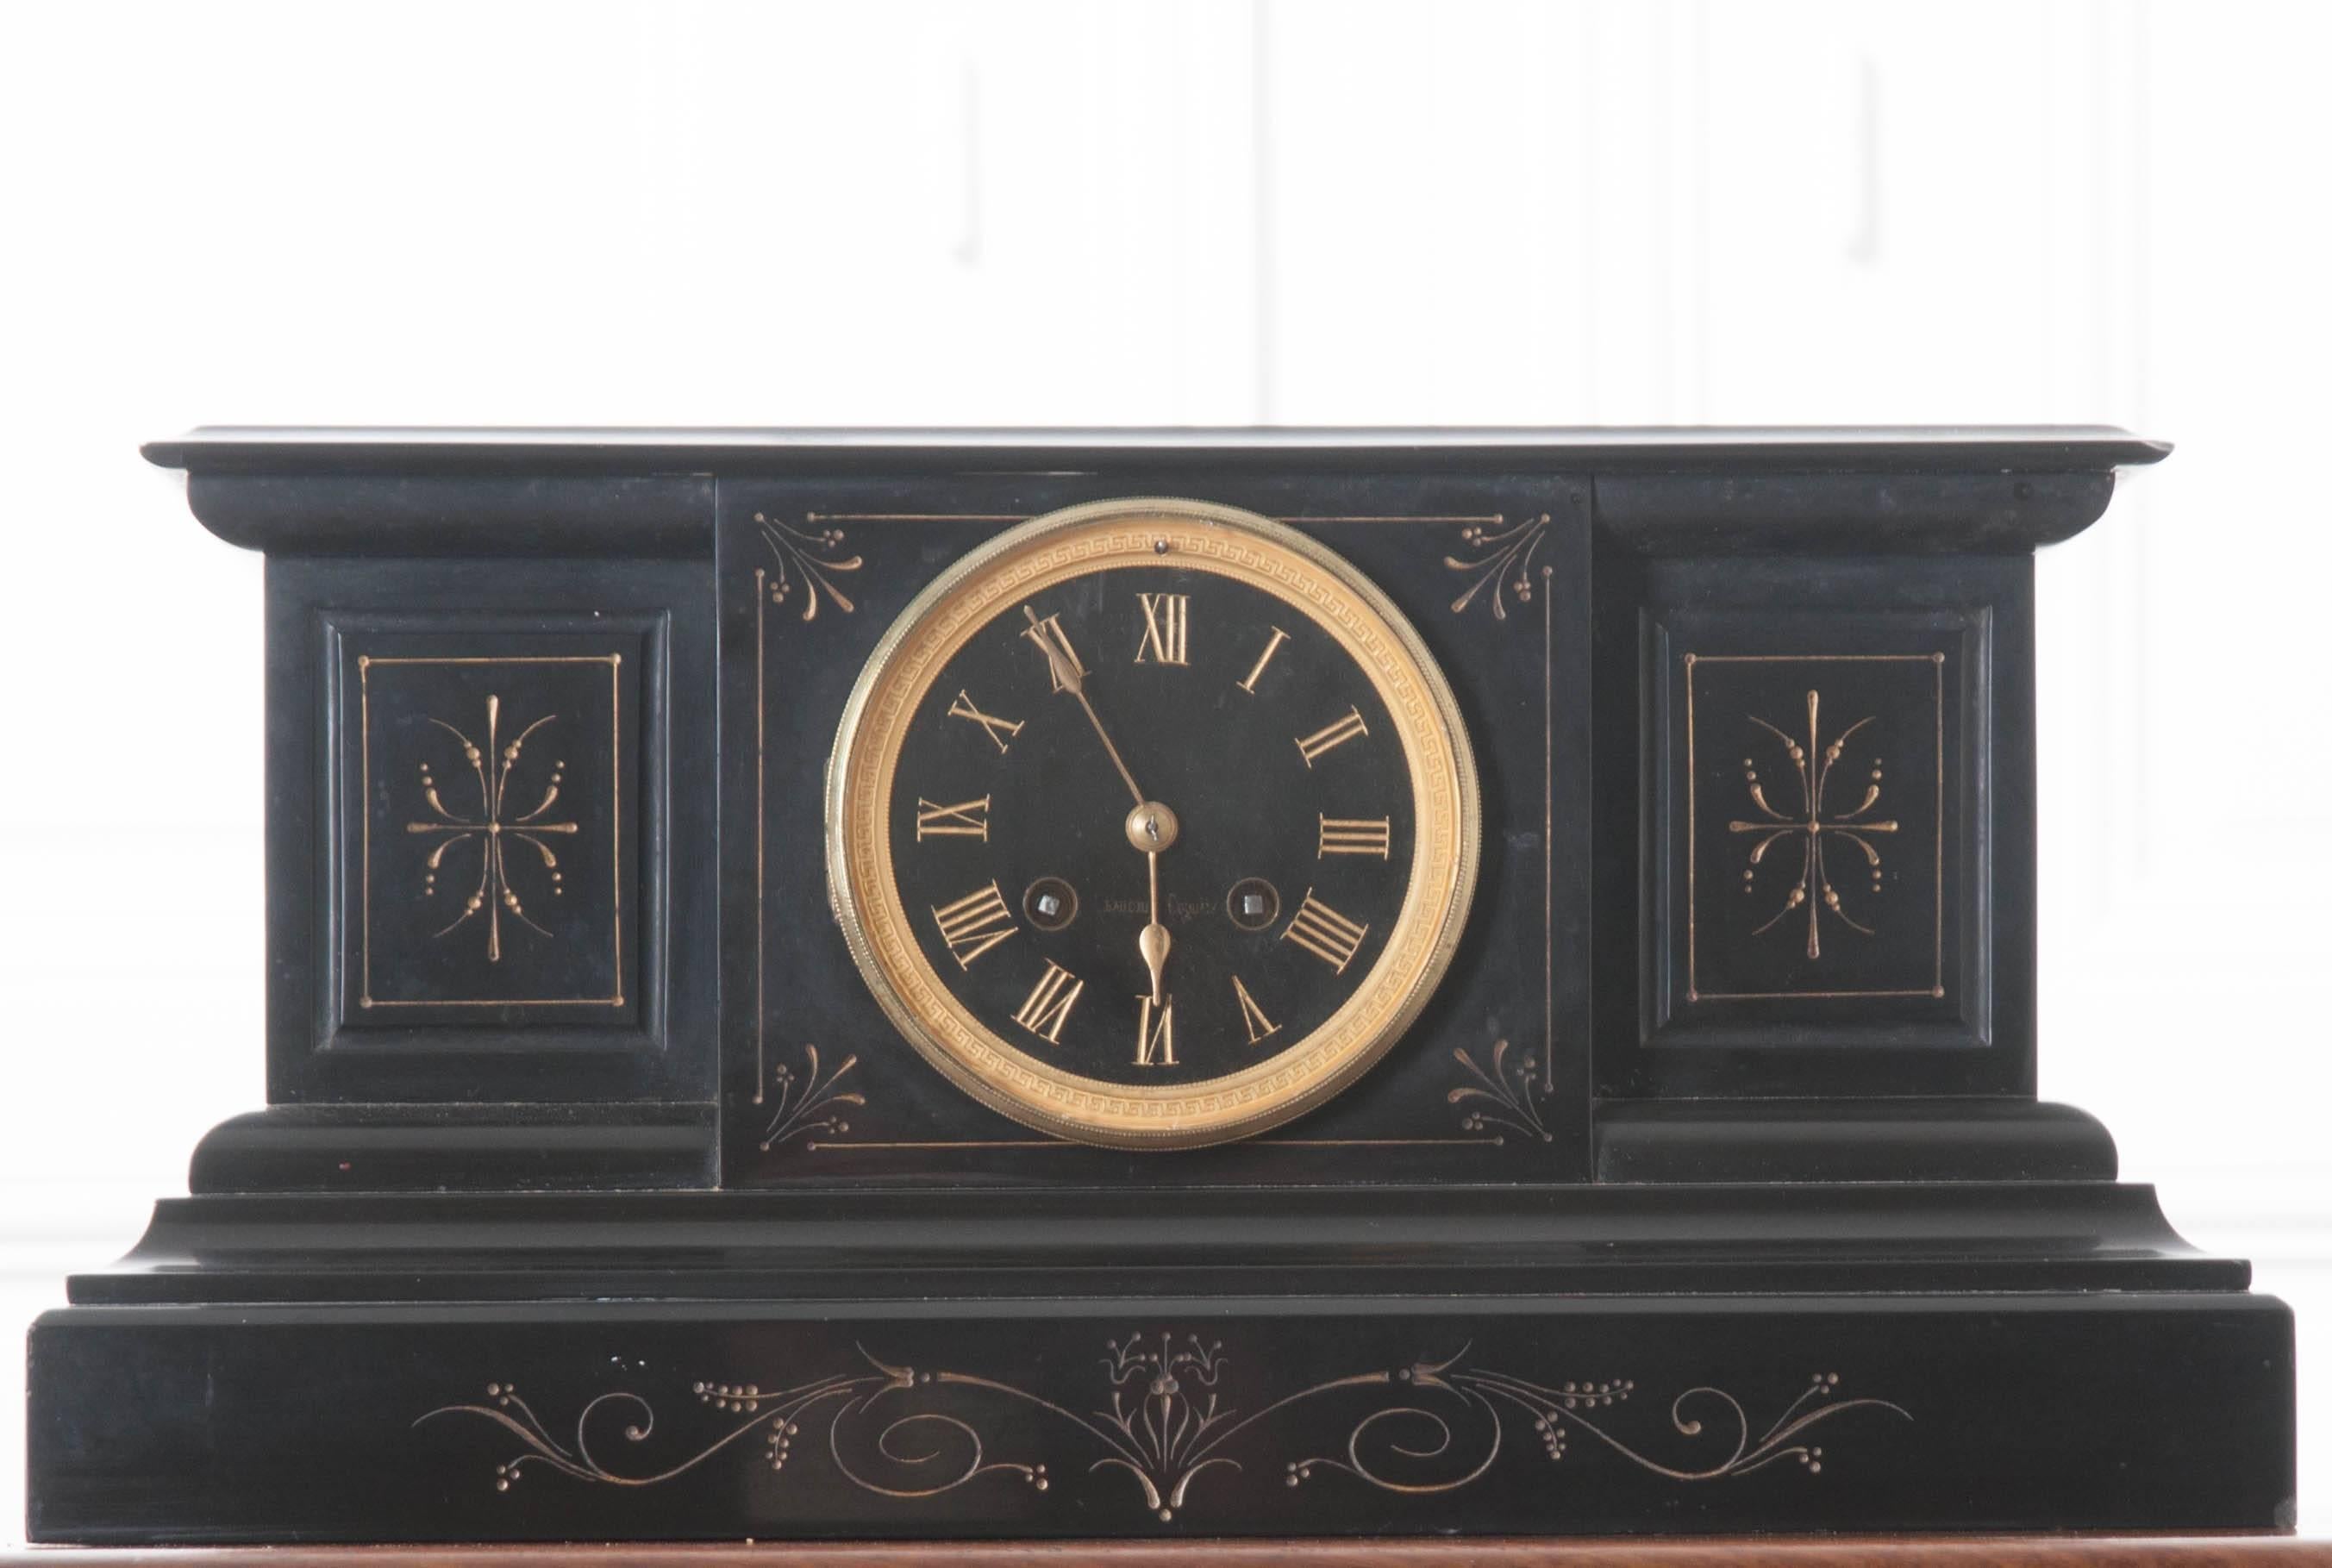 A striking ebony marble mantel clock with brass details from the turn of the 20th century, France. The clock’s body is made entirely of jet black marble, and decorated with scrolled and styled etchings that have been painted gold. The clock’s face